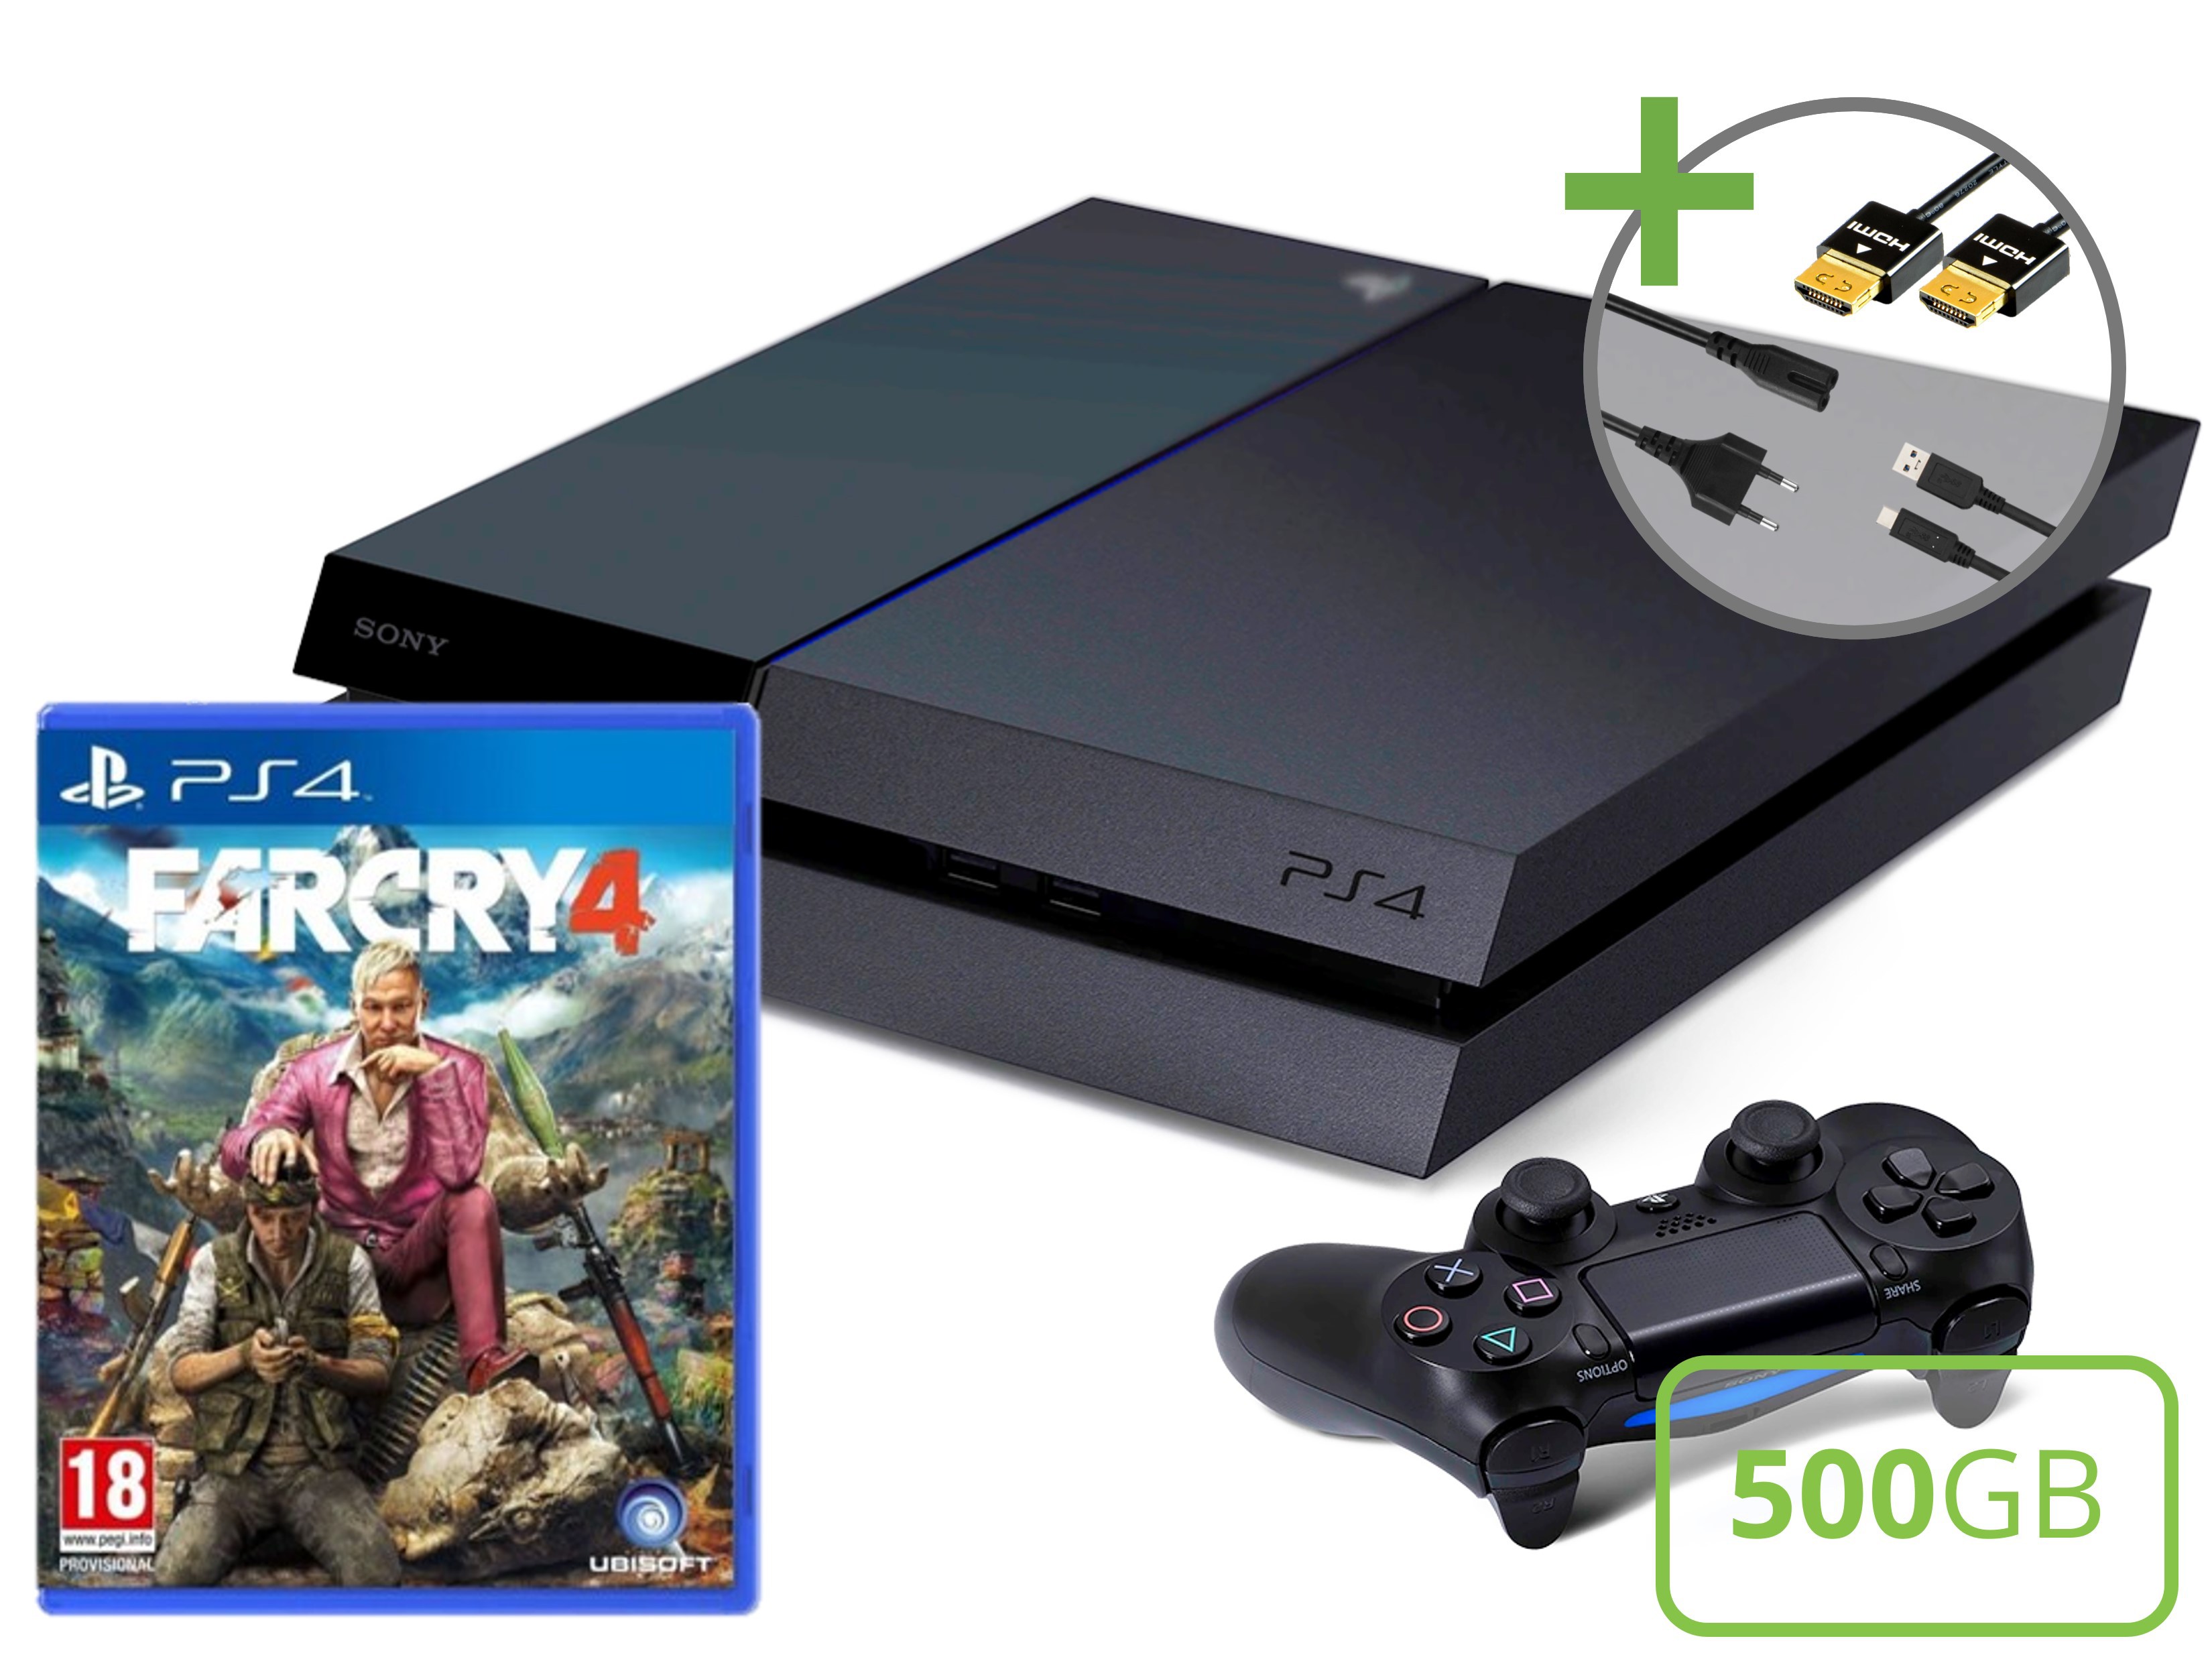 Sony PlayStation 4 Starter Pack - 500GB Far Cry 4 Edition - Playstation 4 Hardware